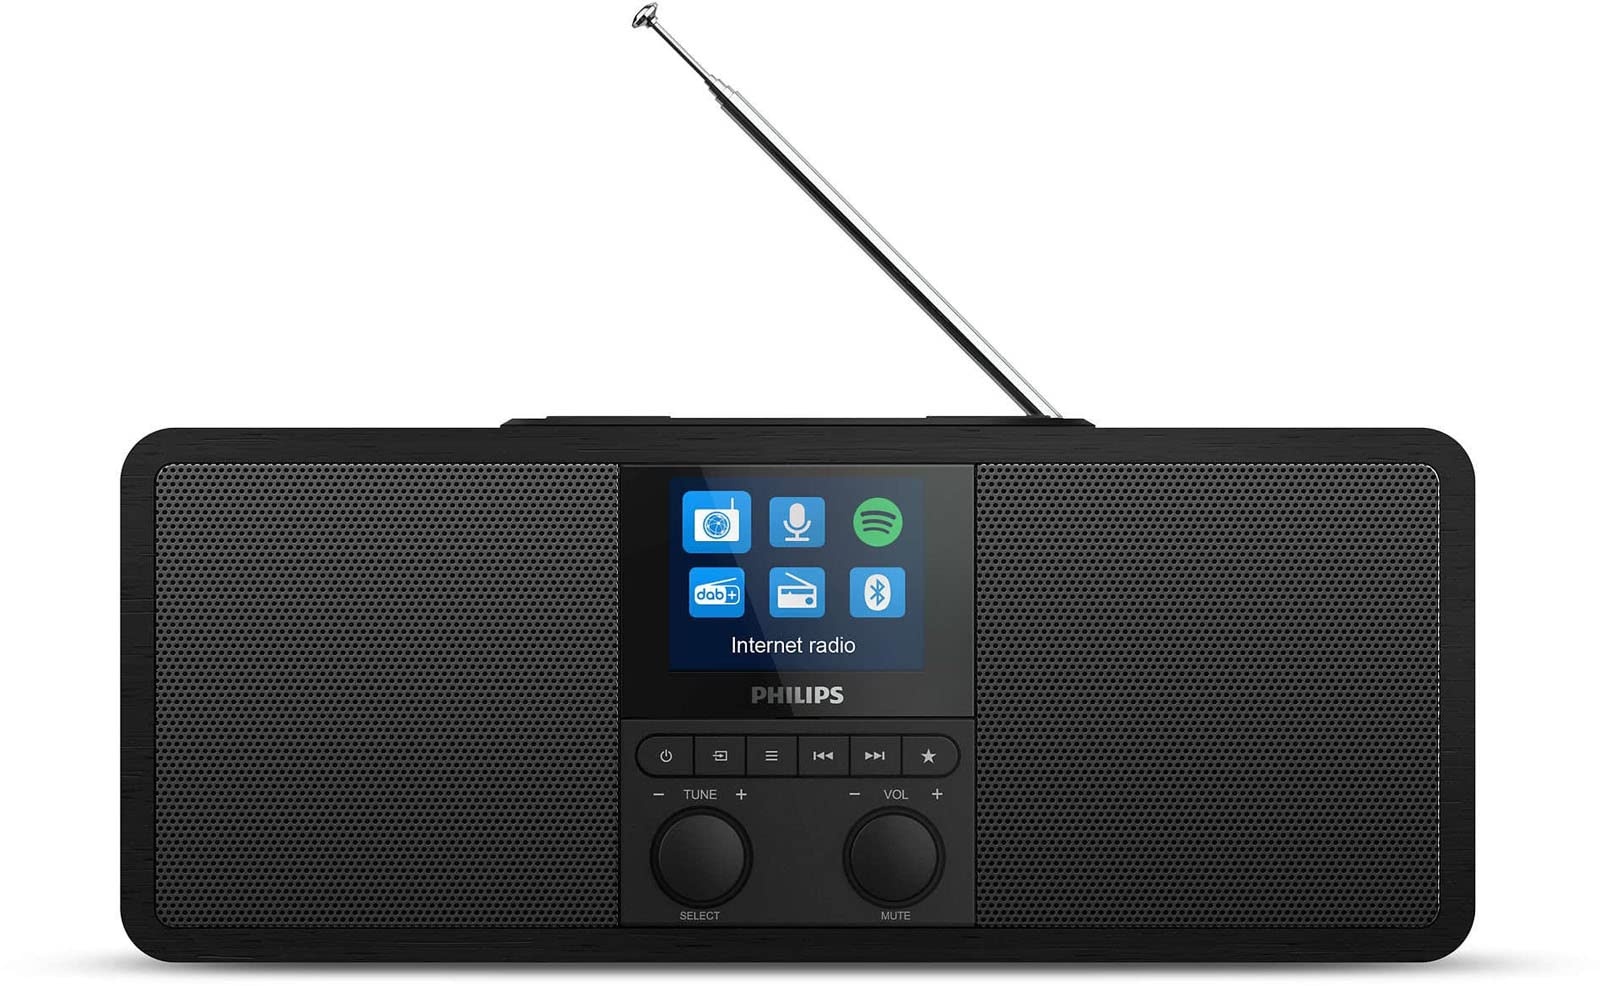 Philips R8805/10 Internetradio mit DAB+ & UKW | Spotify Connect & Bluetooth Streaming | Kabelloses Qi-Ladepad & USB-Anschluss | Wecker & Sleeptimer